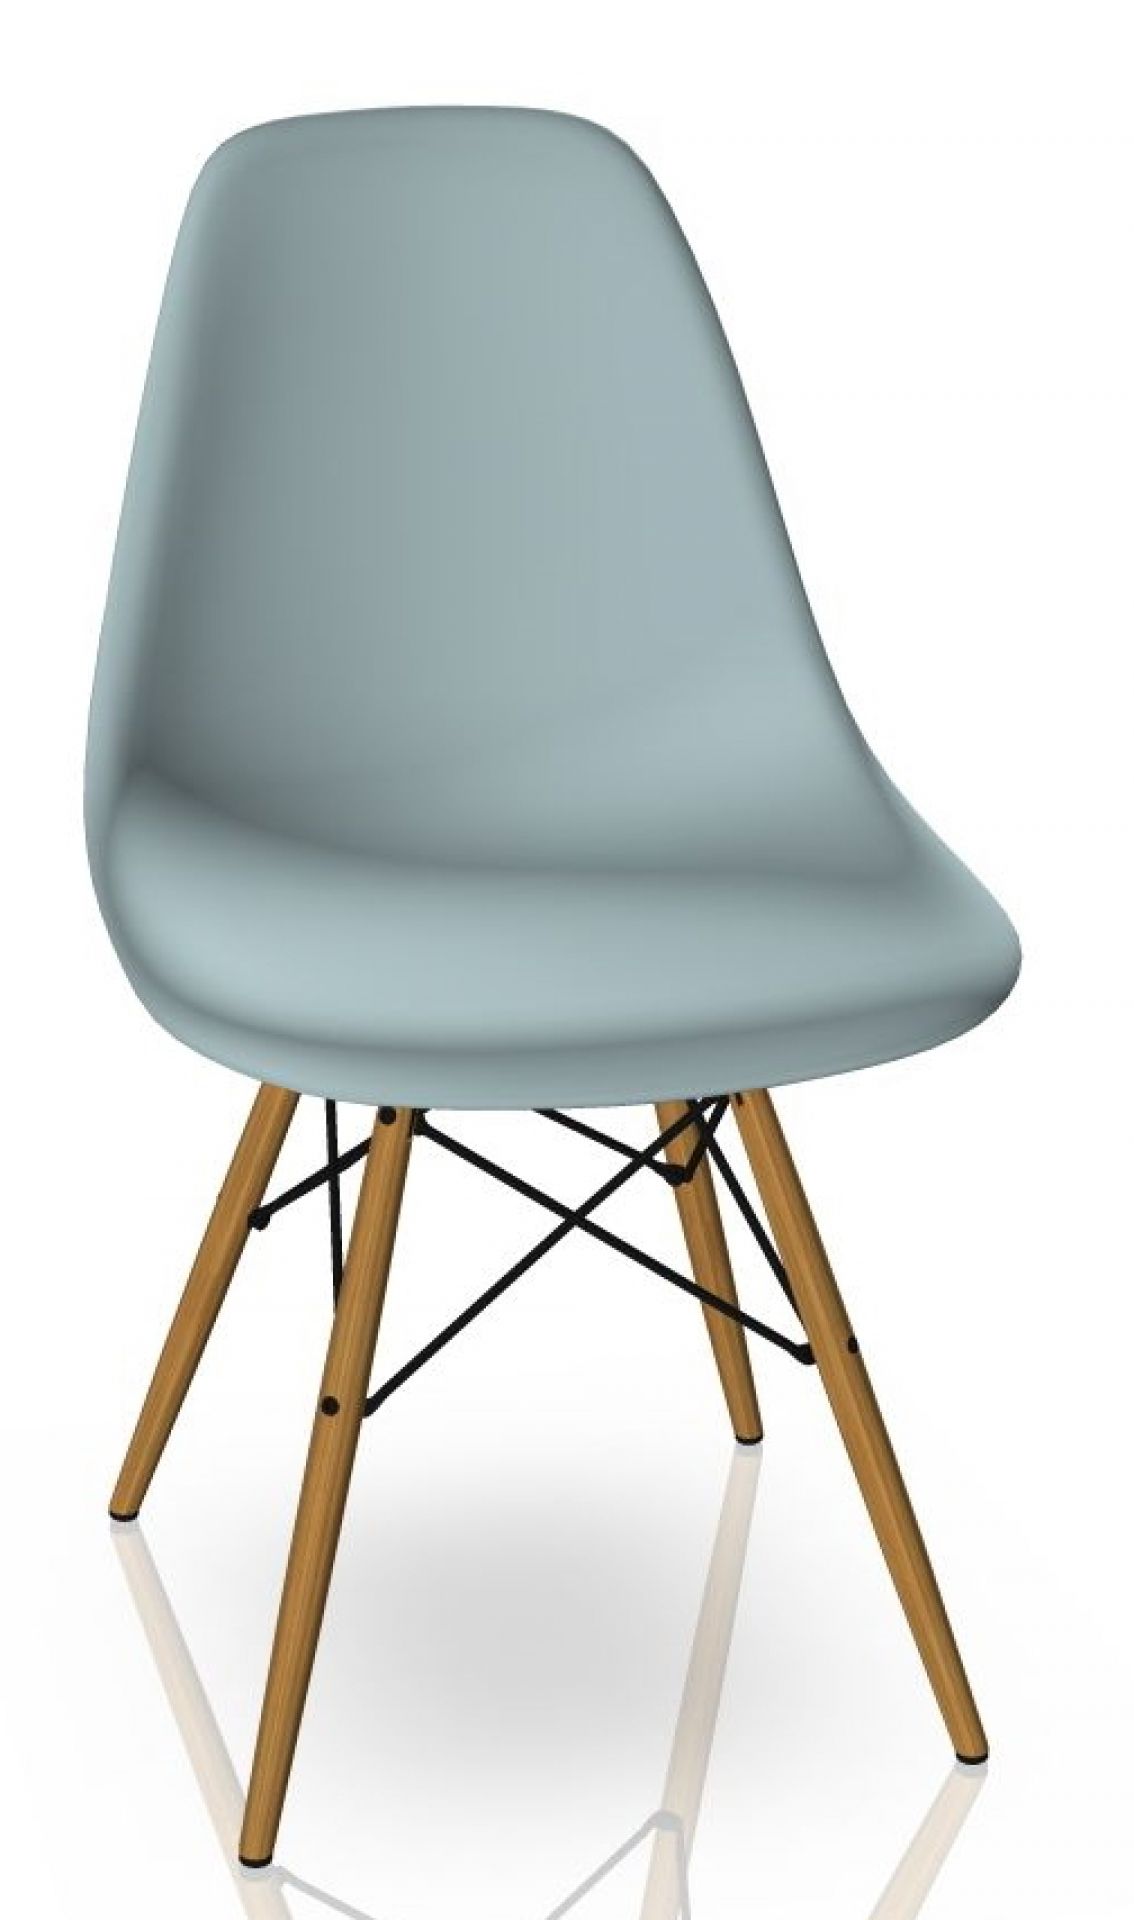 Eames Plastic Side Chair Chair Vitra colored - Ice grey | VITRA 44030500 65 23